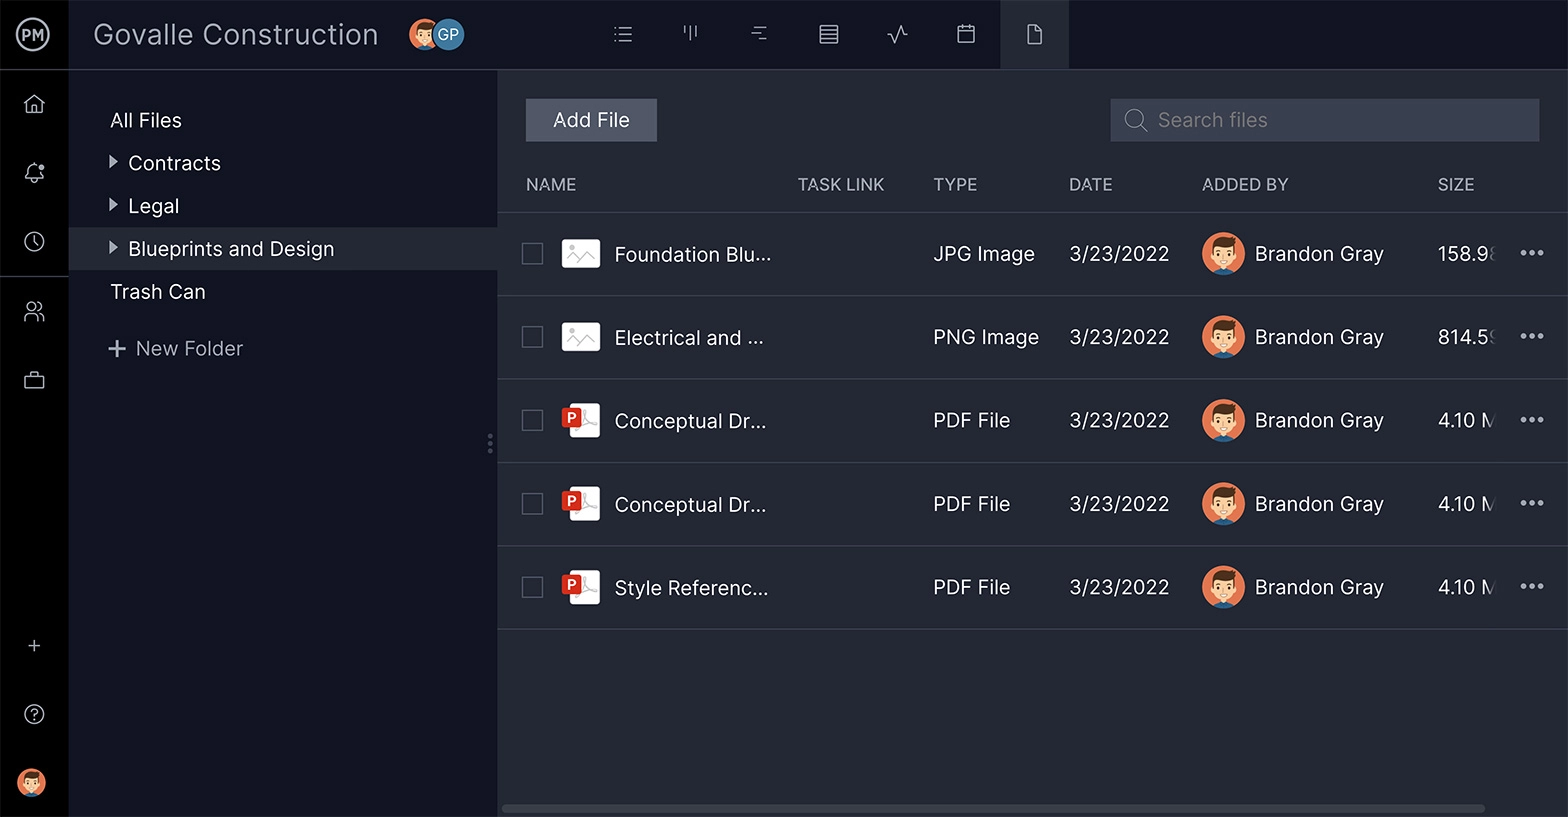 ProjectManager is a project scheduling software with unlimited file storage